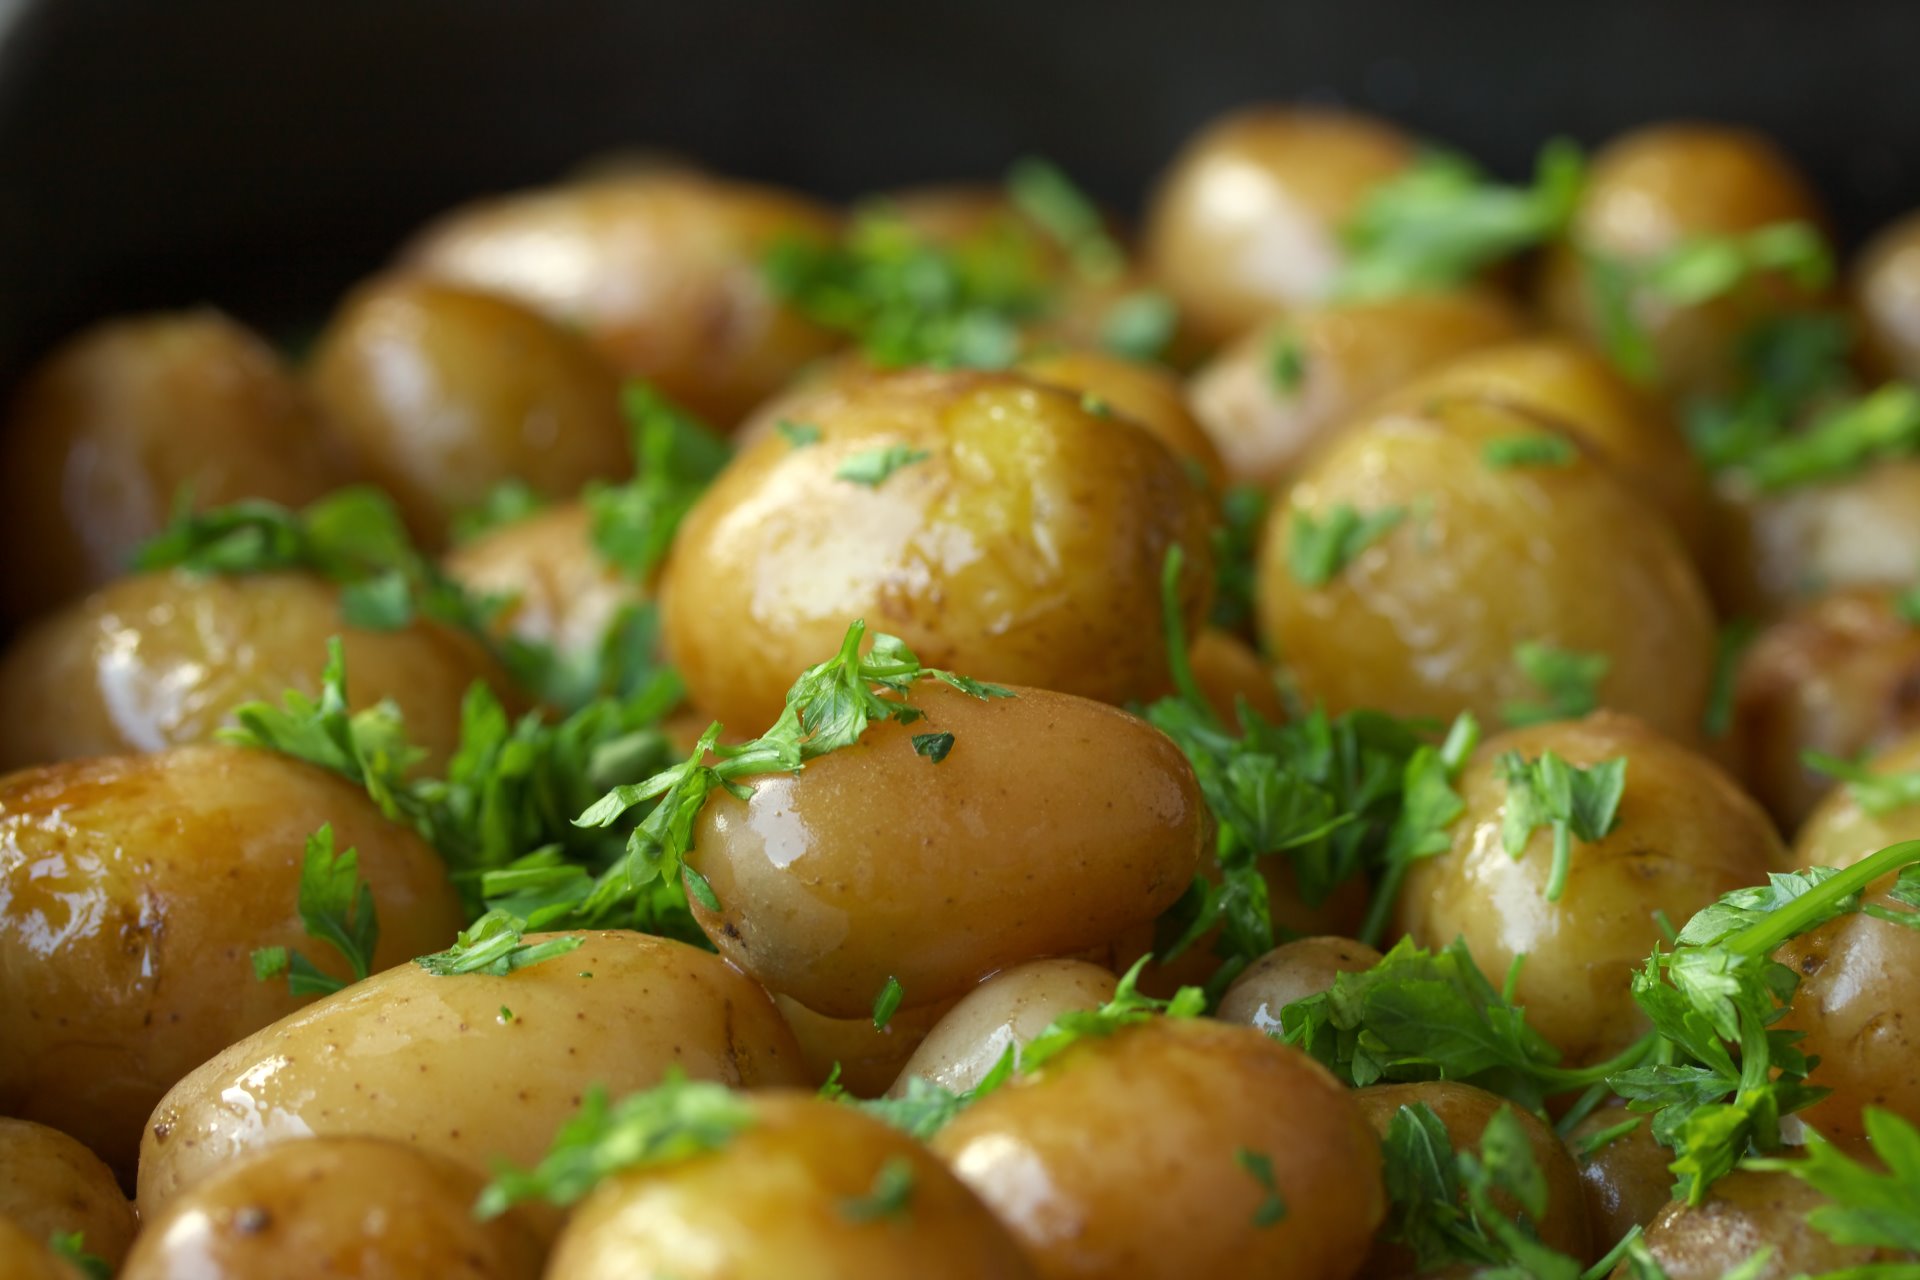 Boiled potato as alternative to chips